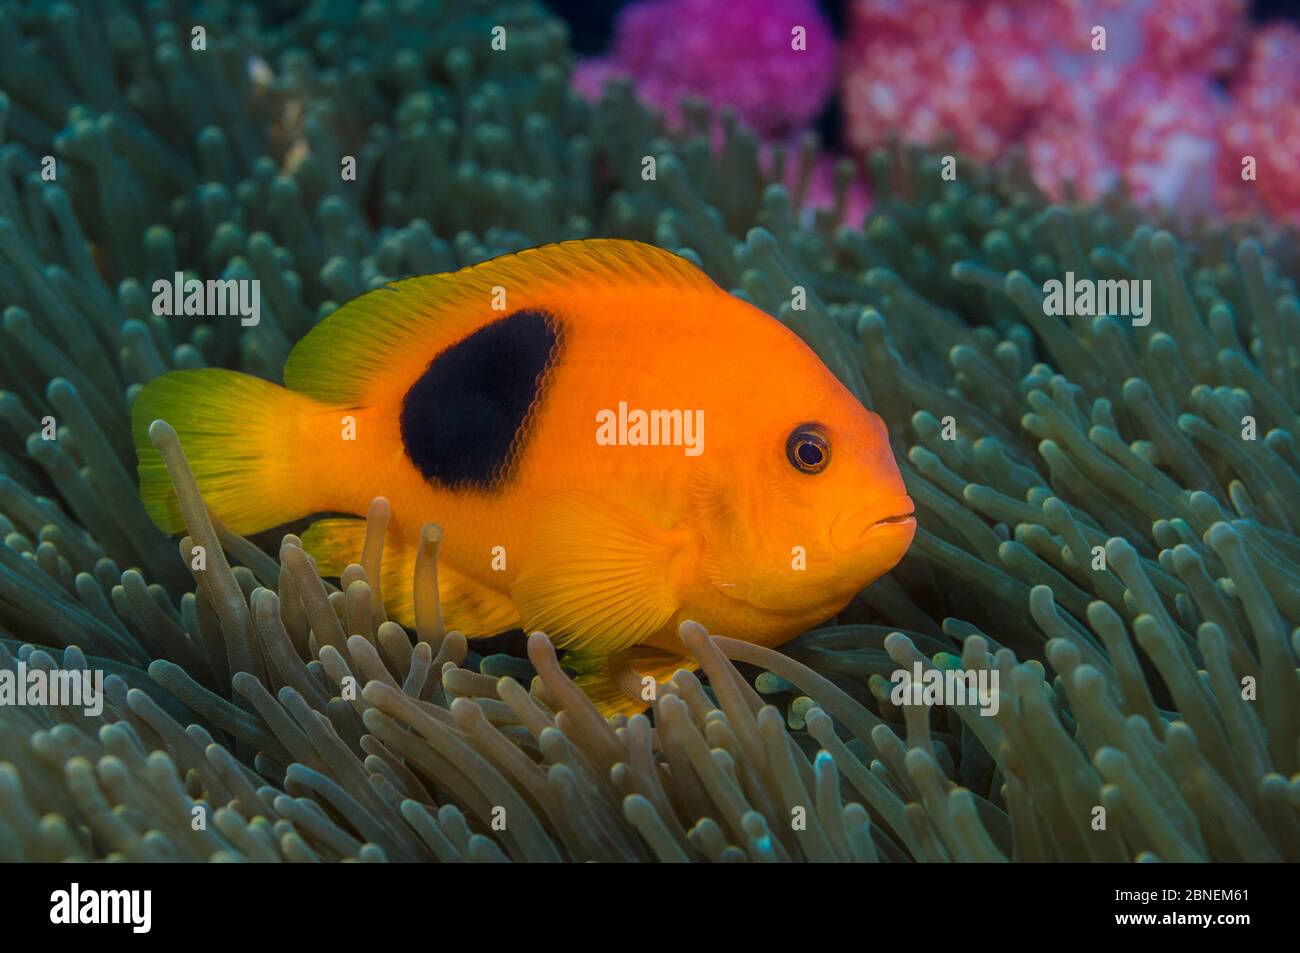 Red saddleback anemonefish (Amphiprion ephippium) in its host anemone, with soft corals behind. This species of anemonefish is endemic to the Andaman Stock Photo